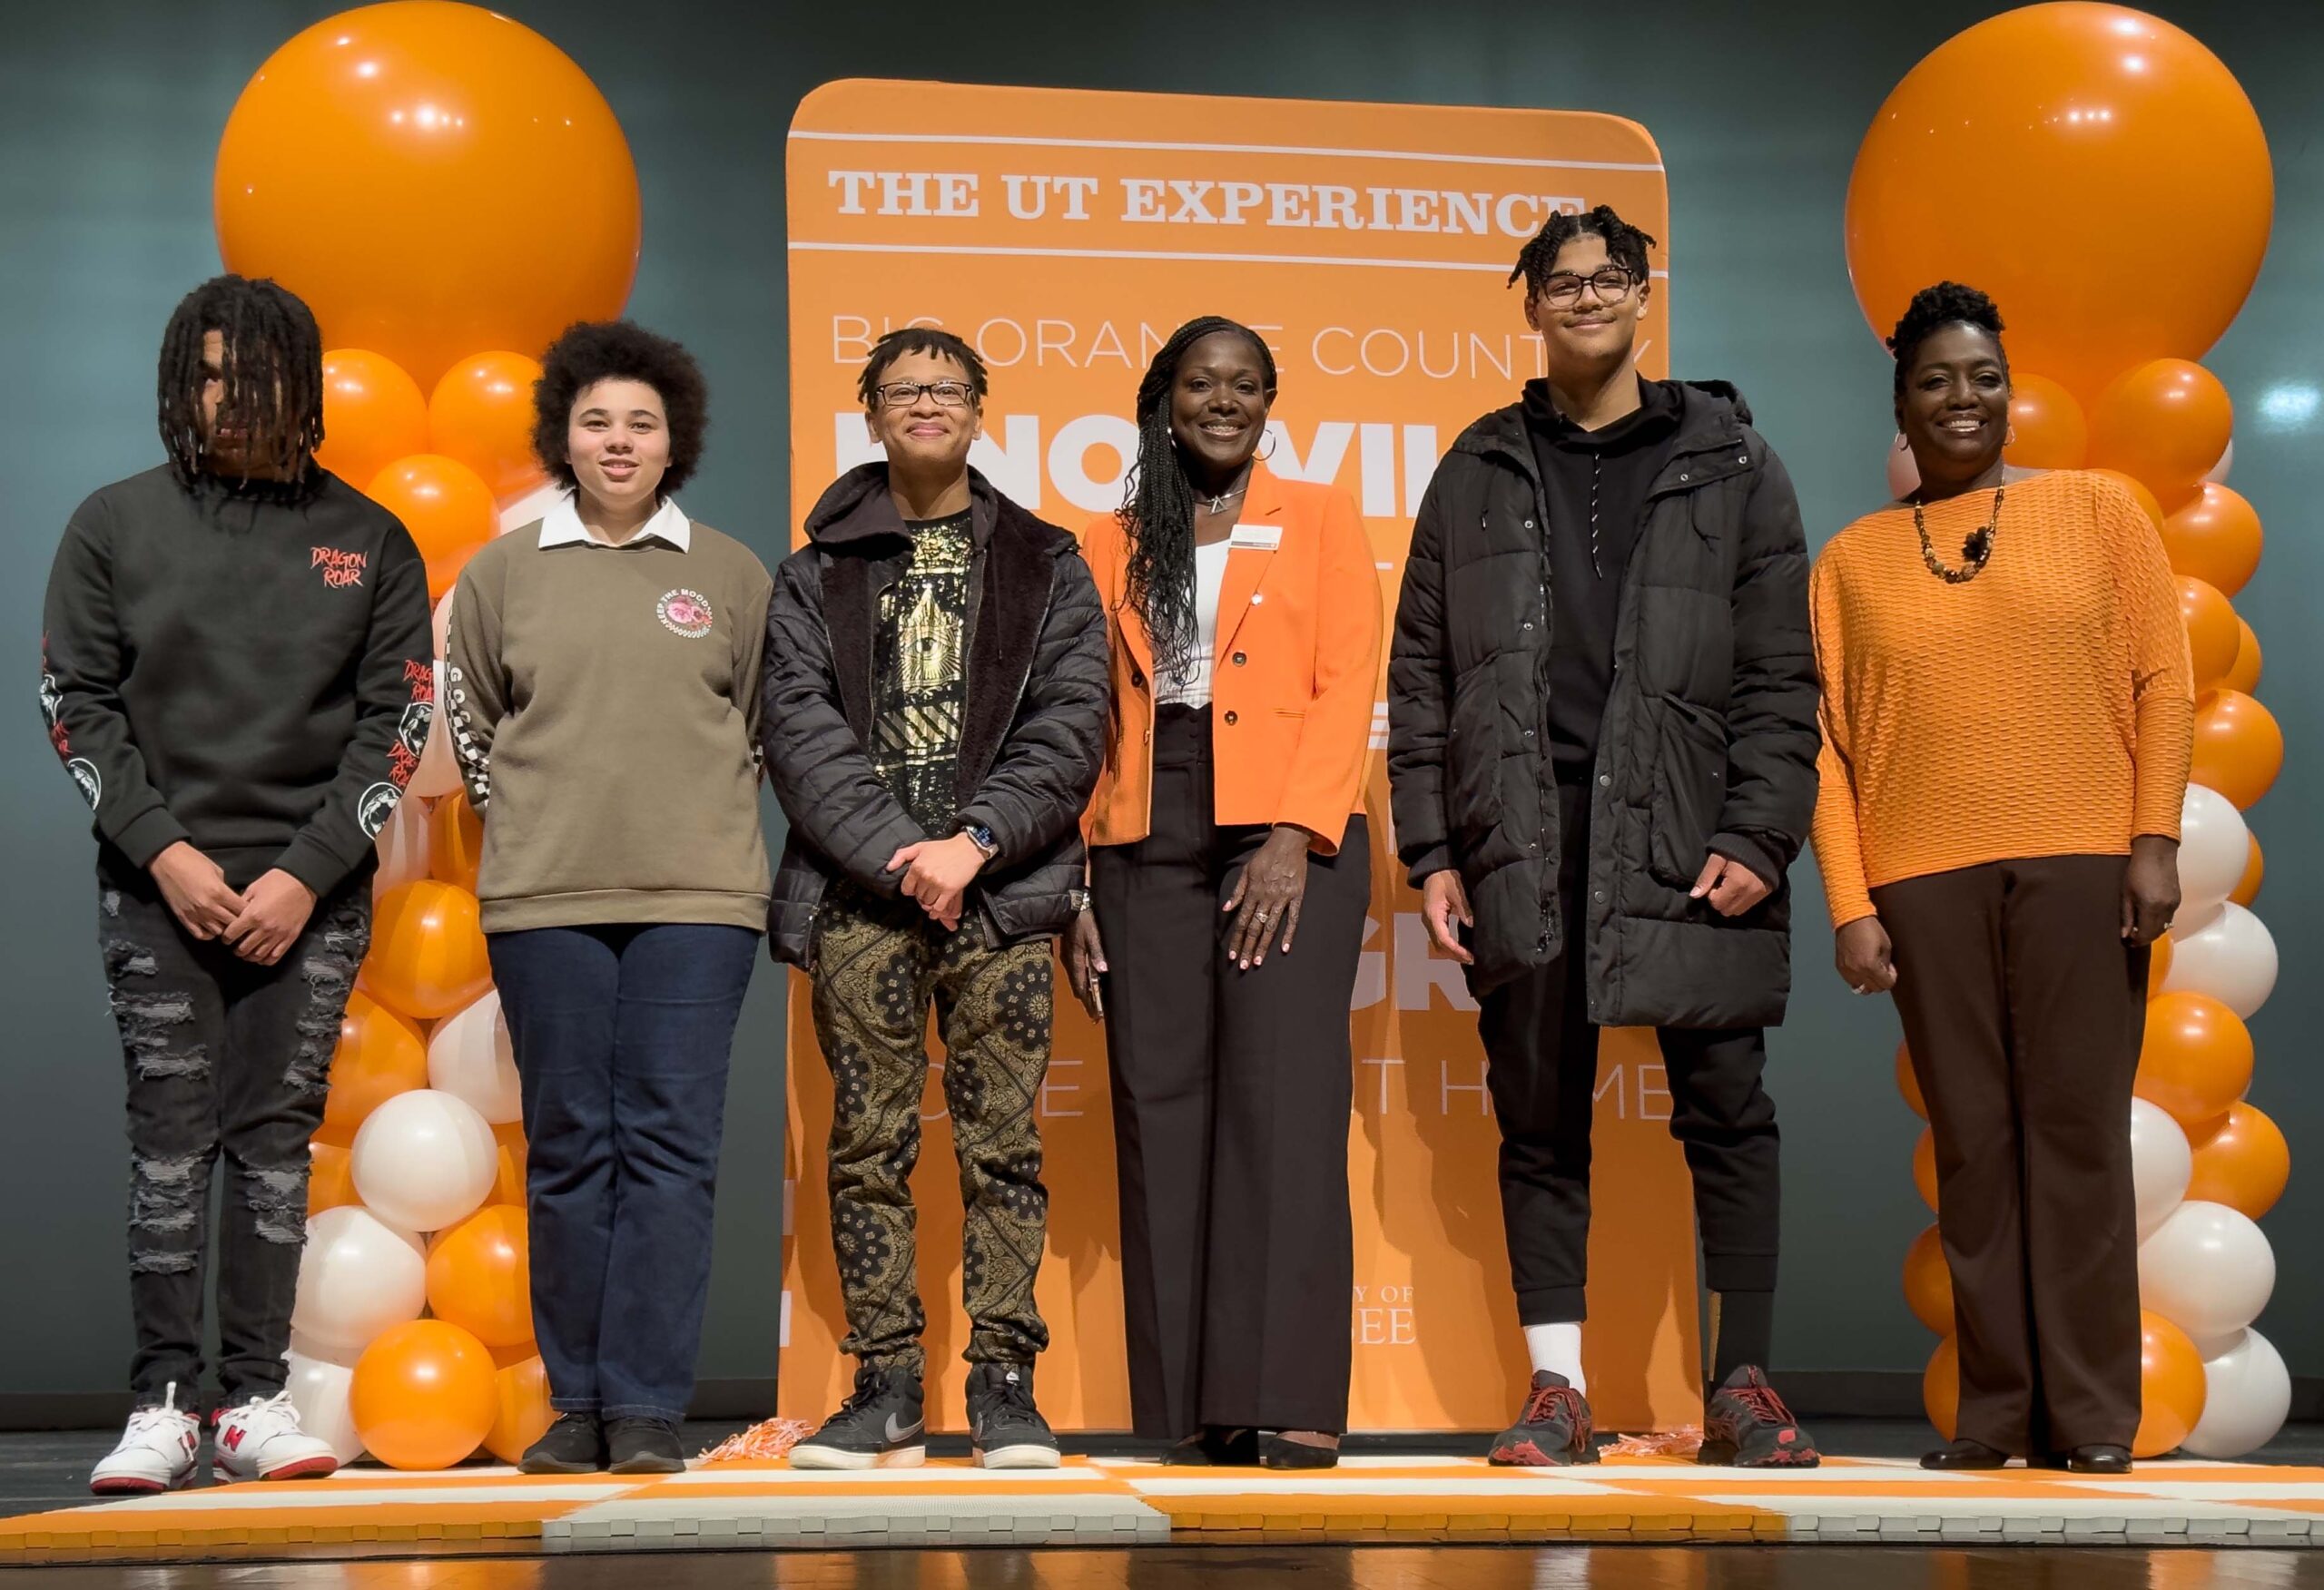 A group of Project Excellence students poses for a picture in front of an orange background with orange balloons on each side. There are three male and one non-binary students in the picture, along with Kimberly Hill and a teacher. All persons in the photo have dark skin and dark hair.